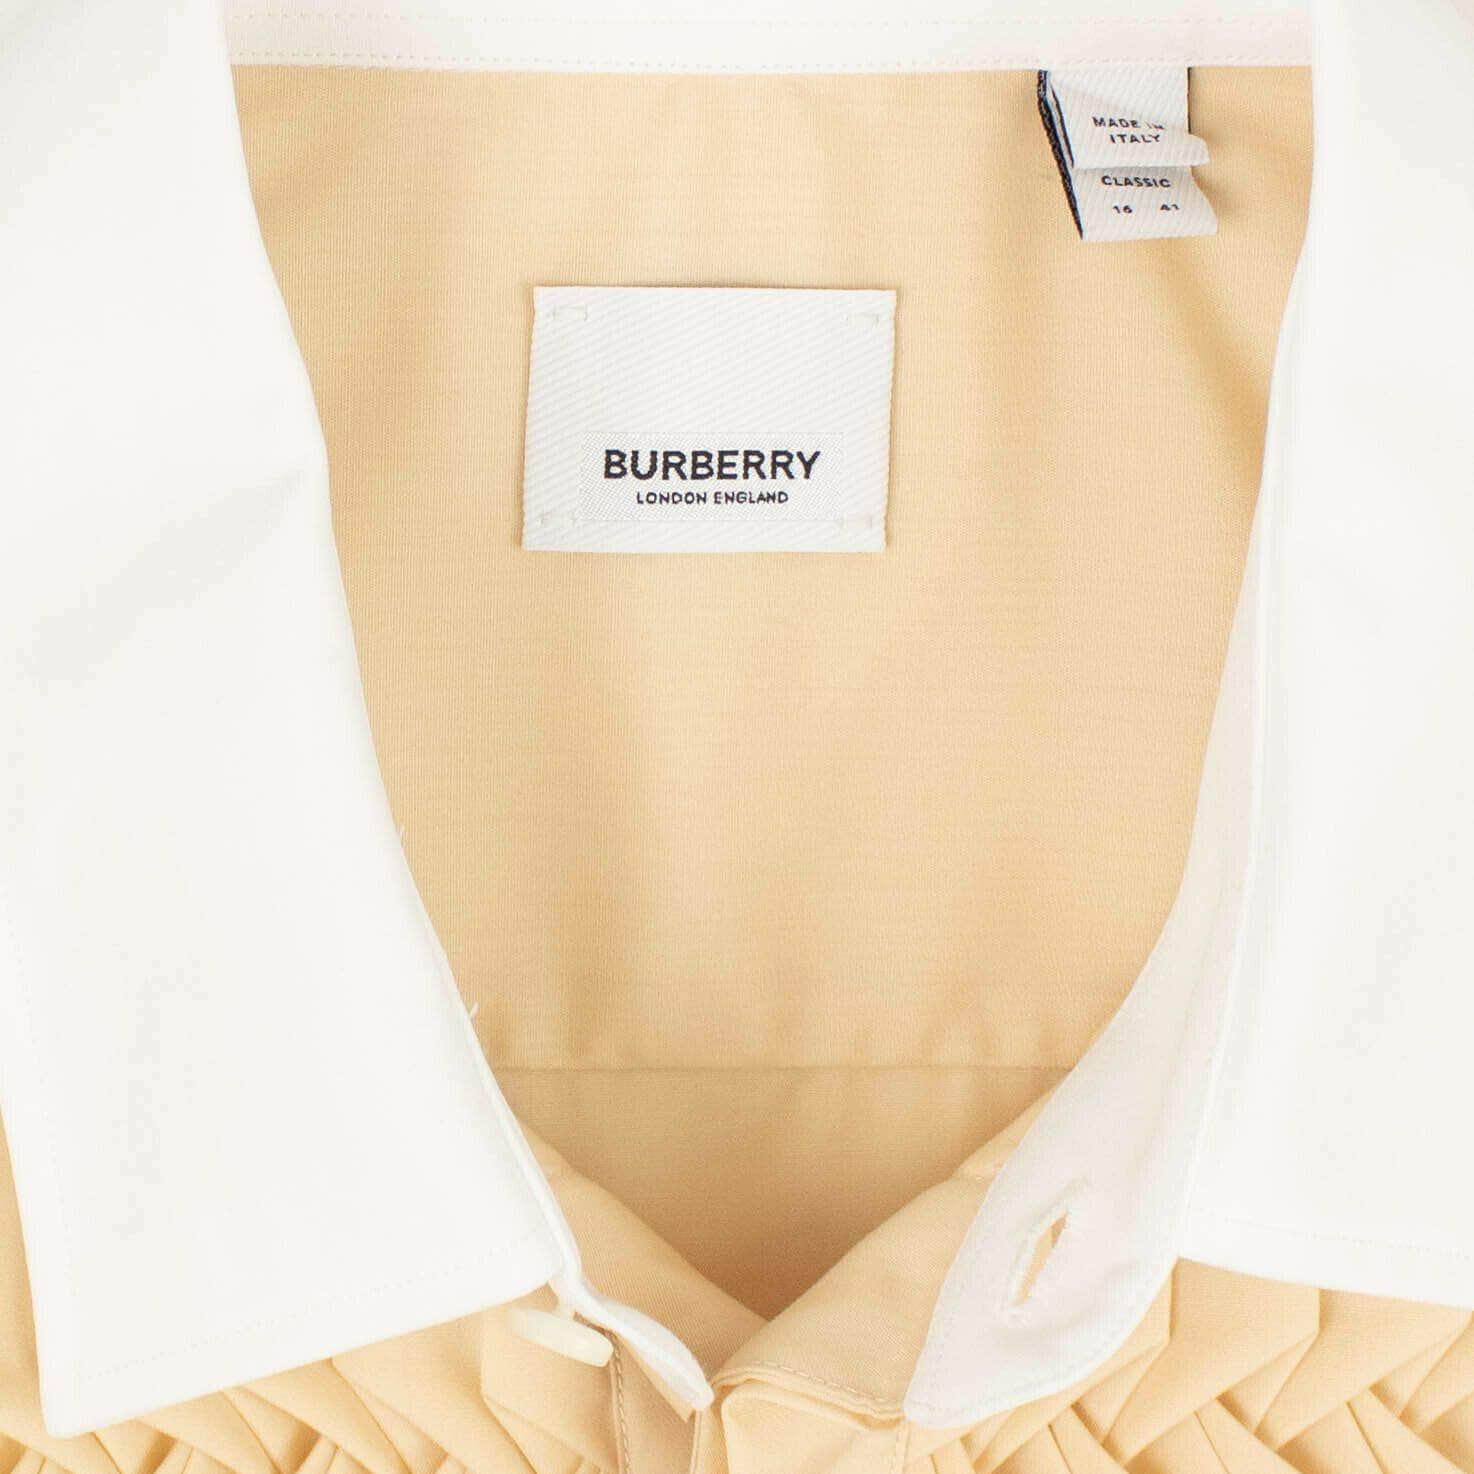 Burberry 1000-2000, burberry, channelenable-all, chicmi, couponcollection, gender-mens, main-clothing, size-38, size-39, size-40, size-41 41 Tan Buttermilk Collar Shirt 95-BRB-1015/41 95-BRB-1015/41